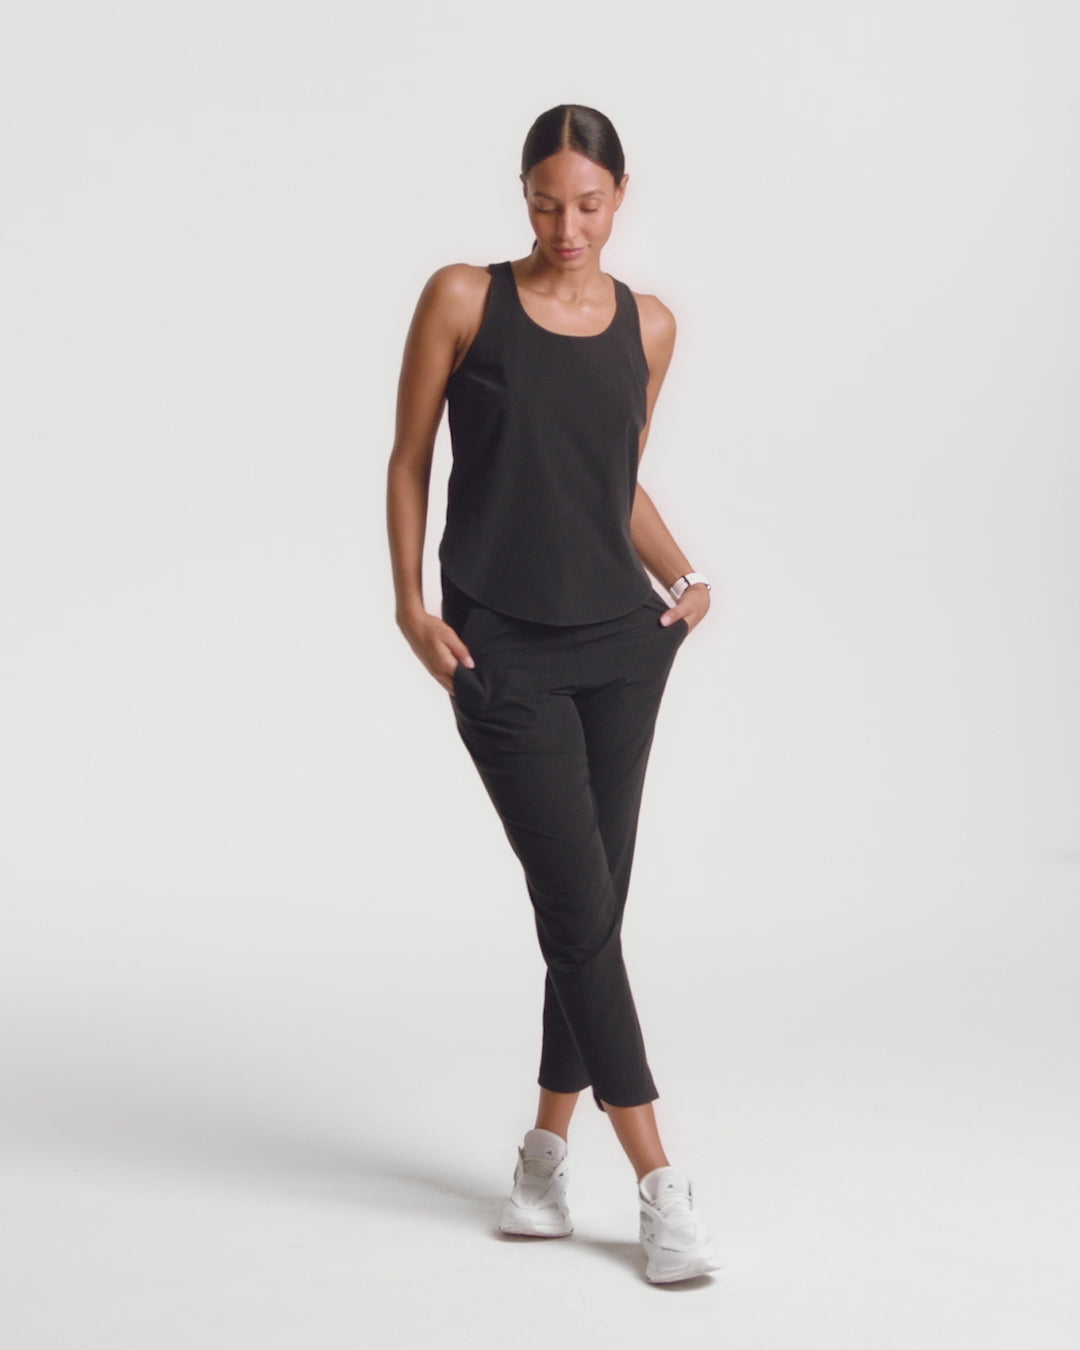 Spanx Casual Fridays collection: Sweat-wicking pants, shirts, shorts -  Reviewed